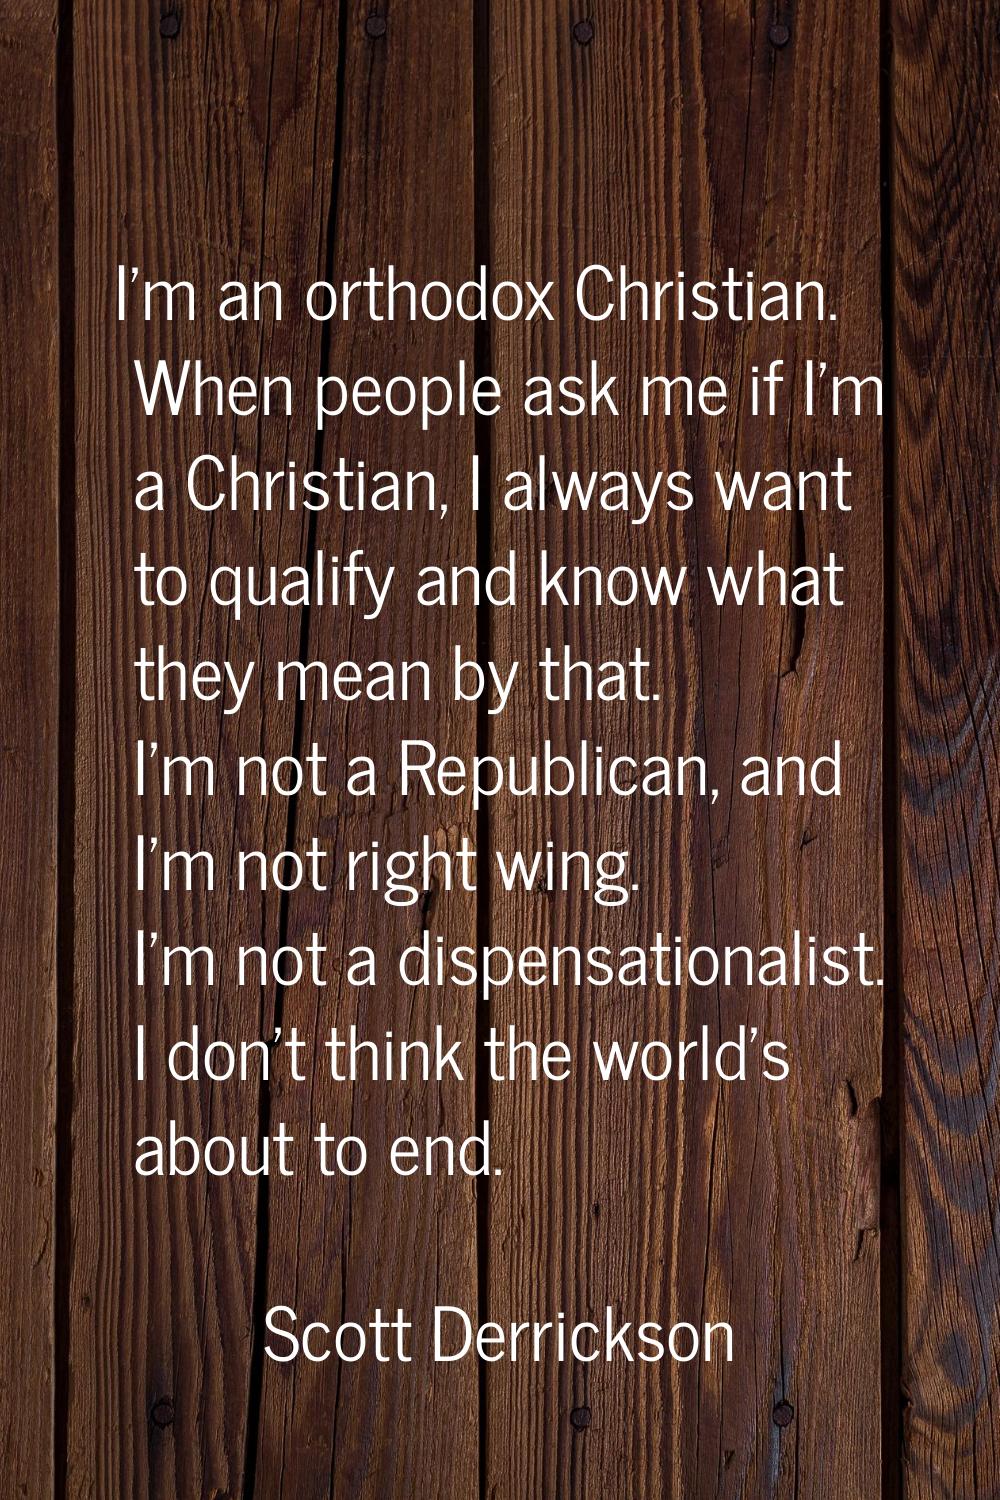 I'm an orthodox Christian. When people ask me if I'm a Christian, I always want to qualify and know